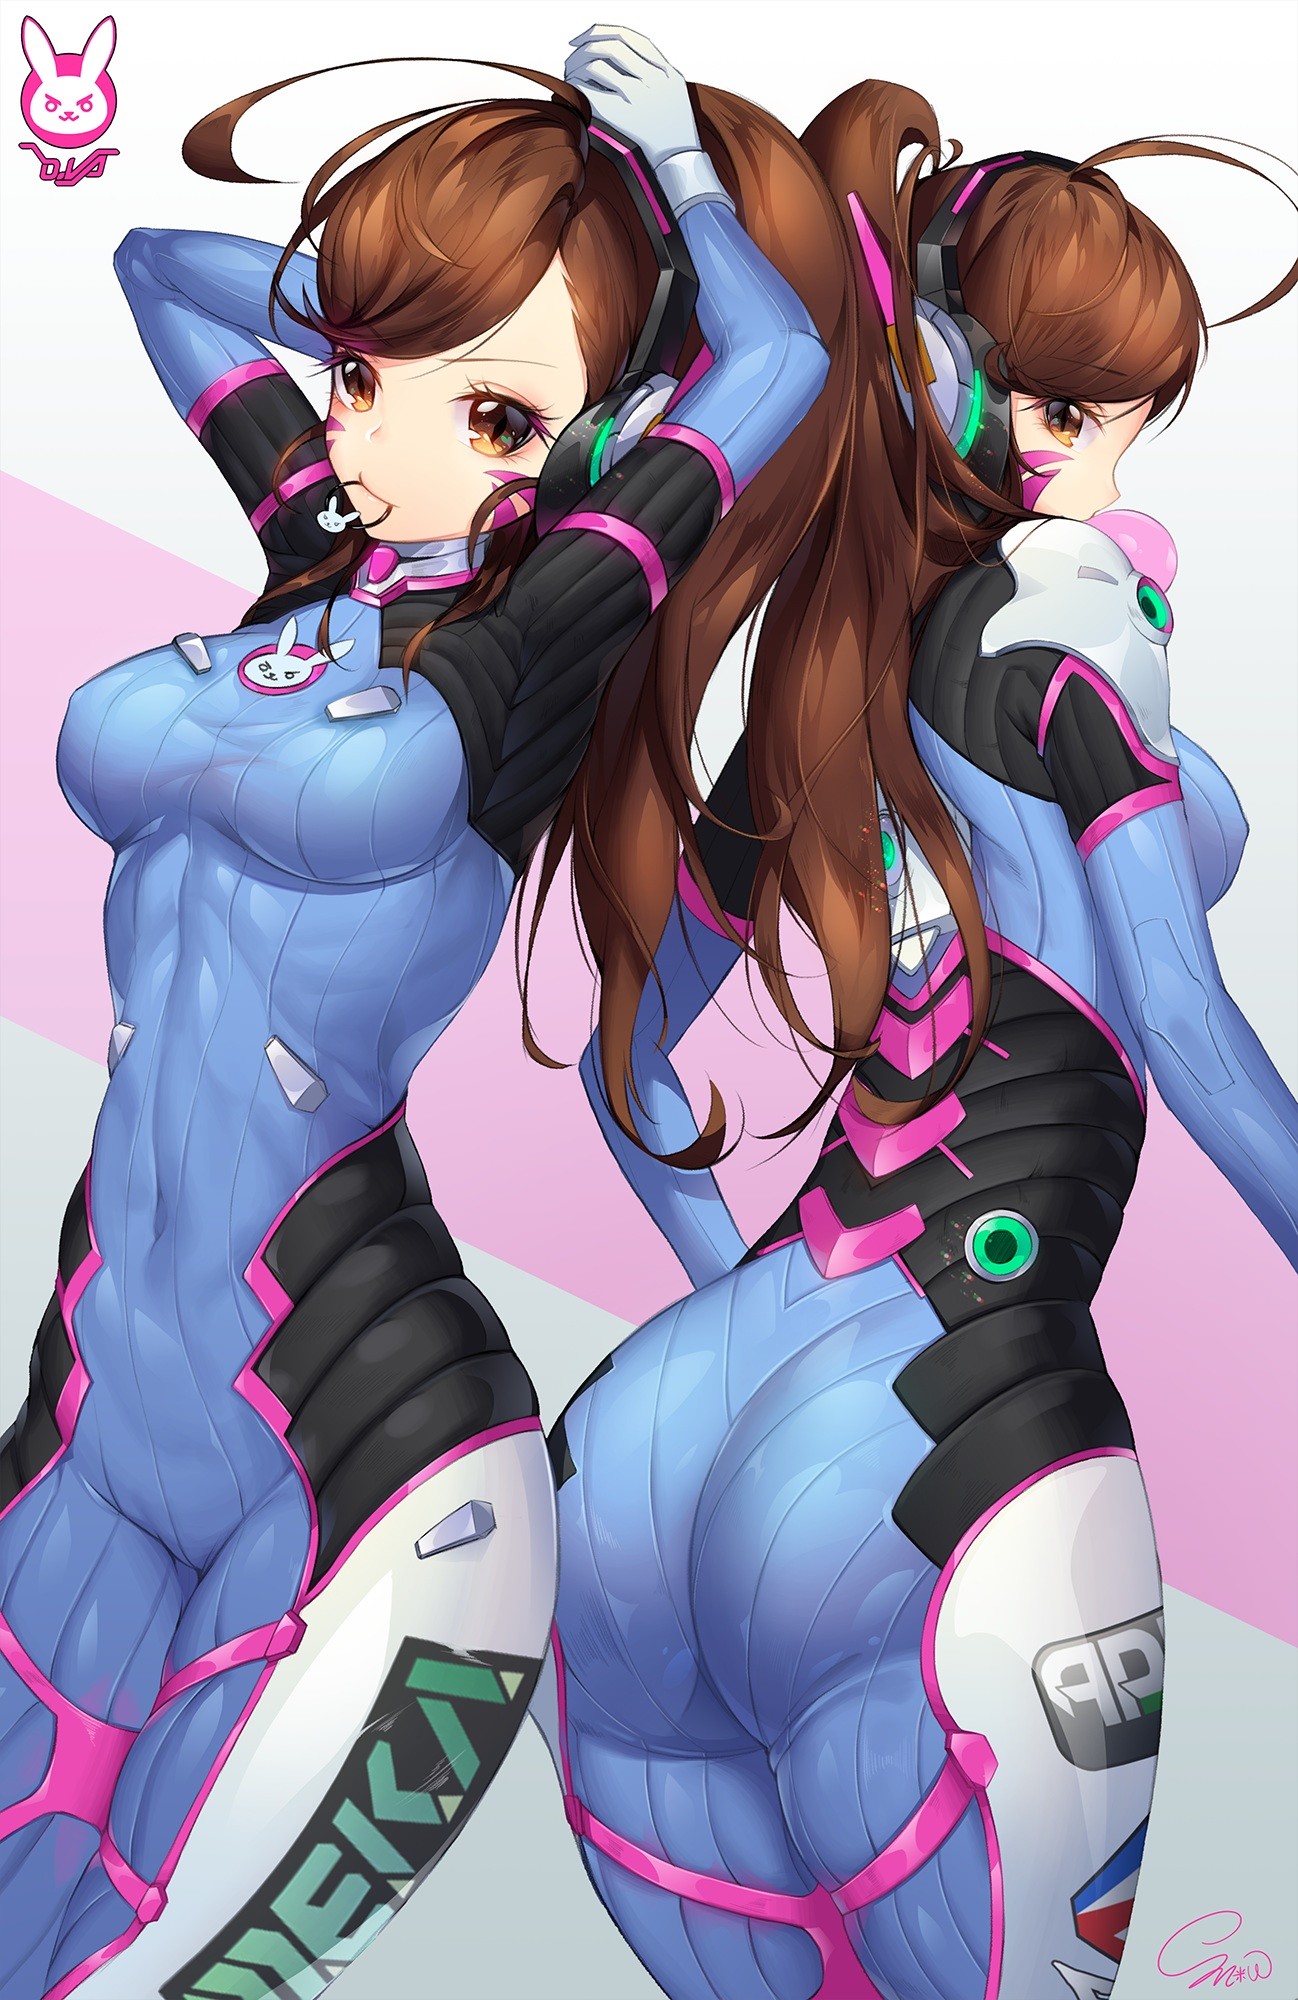 Anime 1298x2000 anime anime girls Overwatch D.Va (Overwatch) ass bodysuit long hair headphones video game girls video game characters boobs arms up Pixiv PC gaming